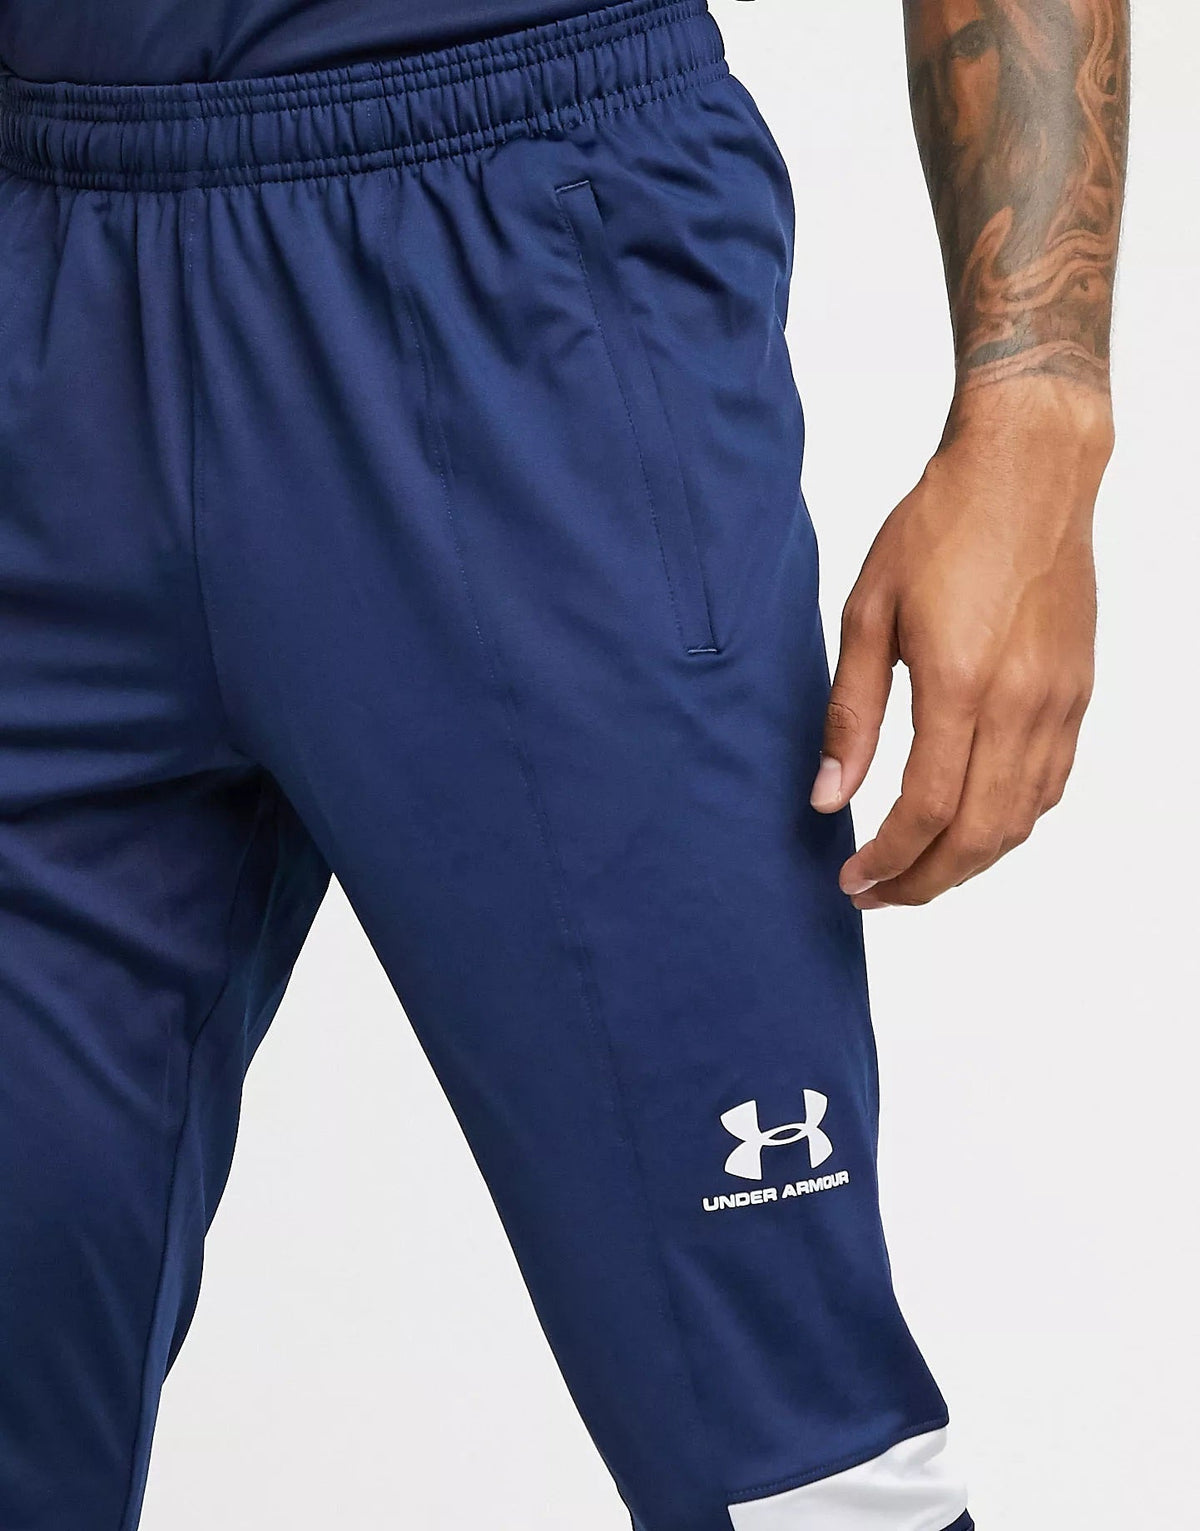 Under Armour Mens Football Challenger Training Trousers in Navy